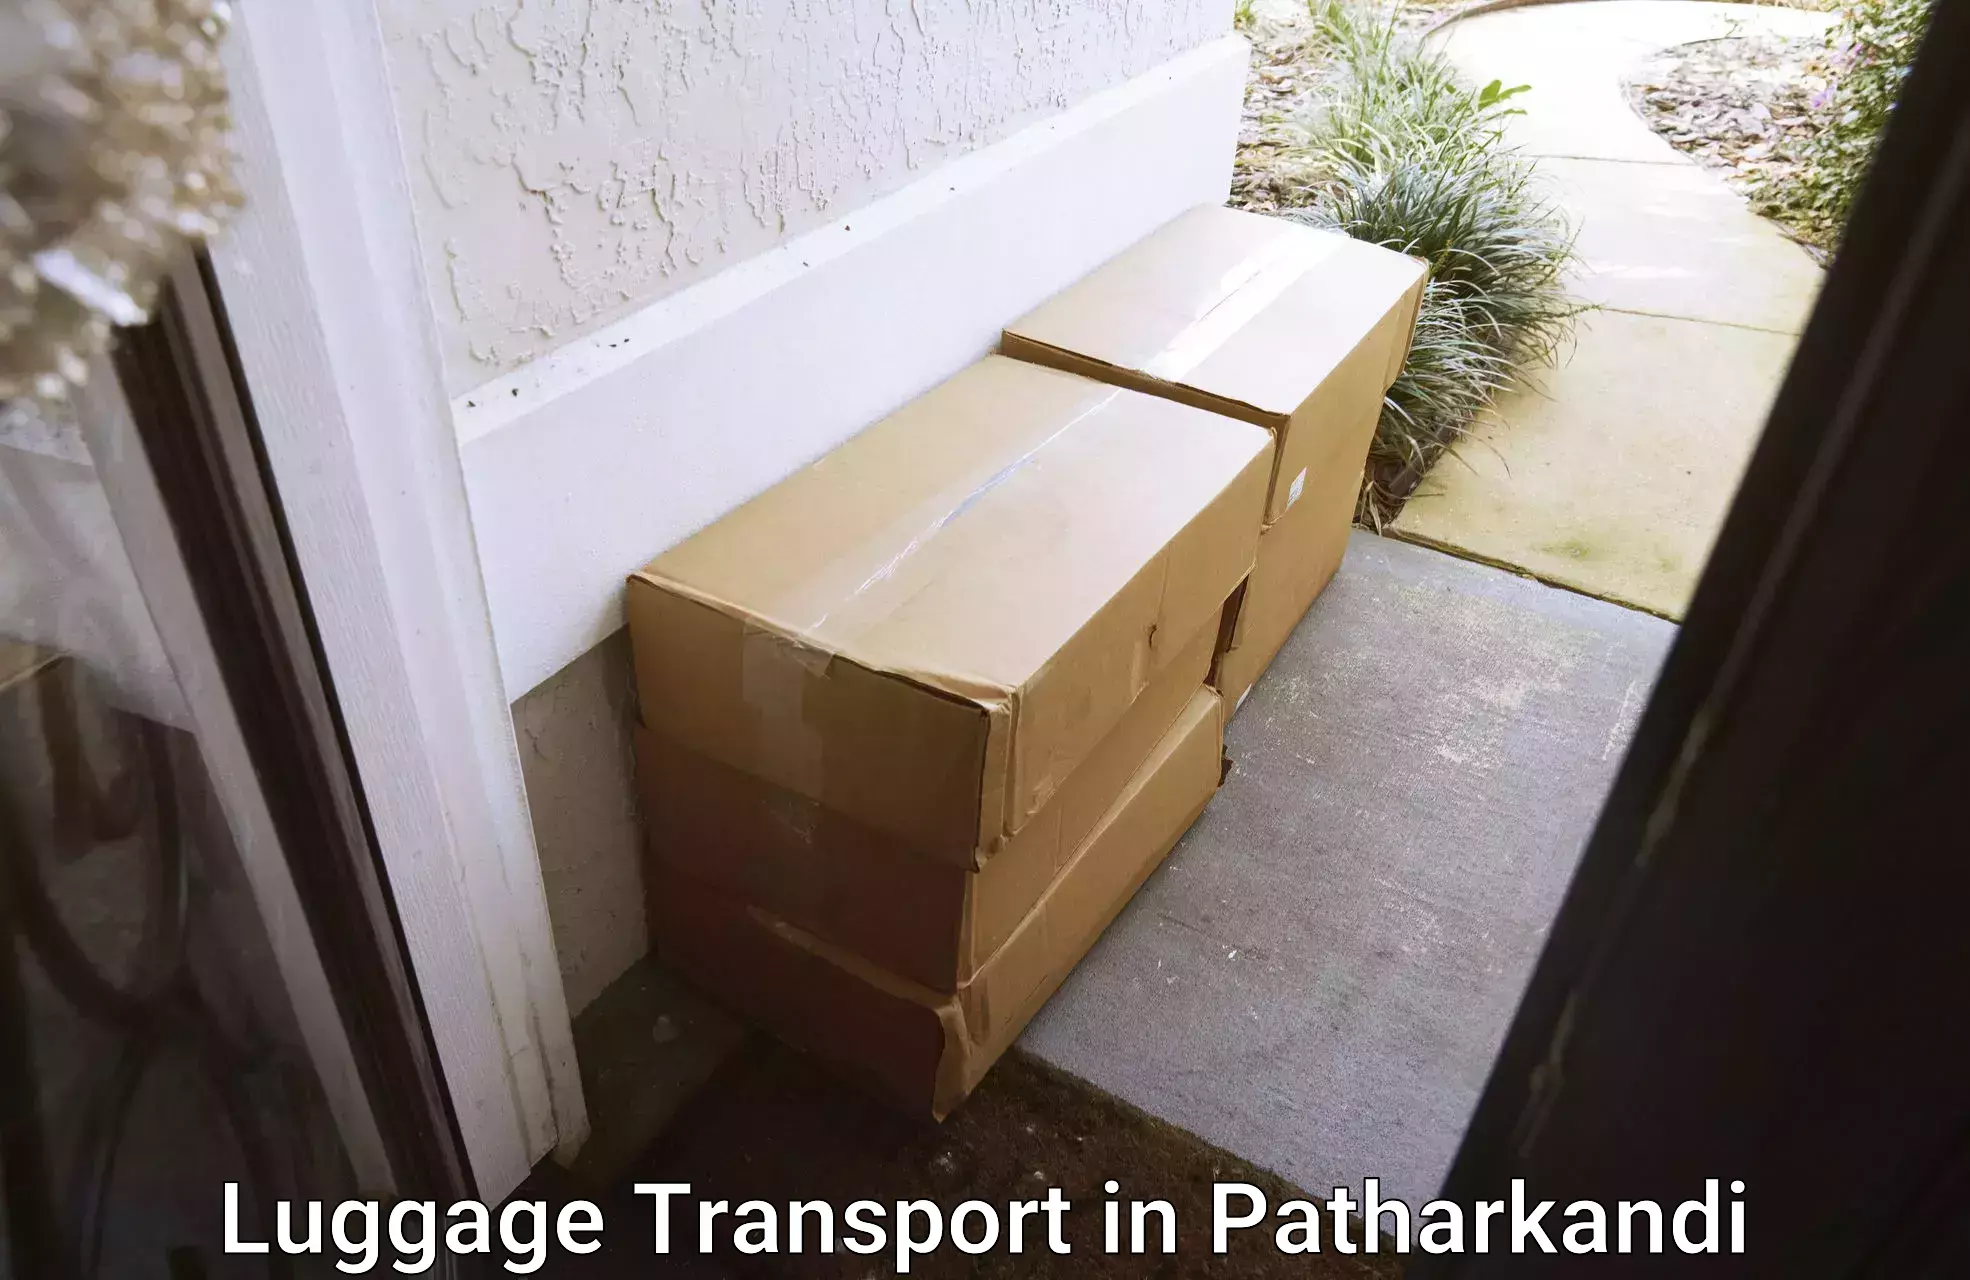 Luggage delivery operations in Patharkandi